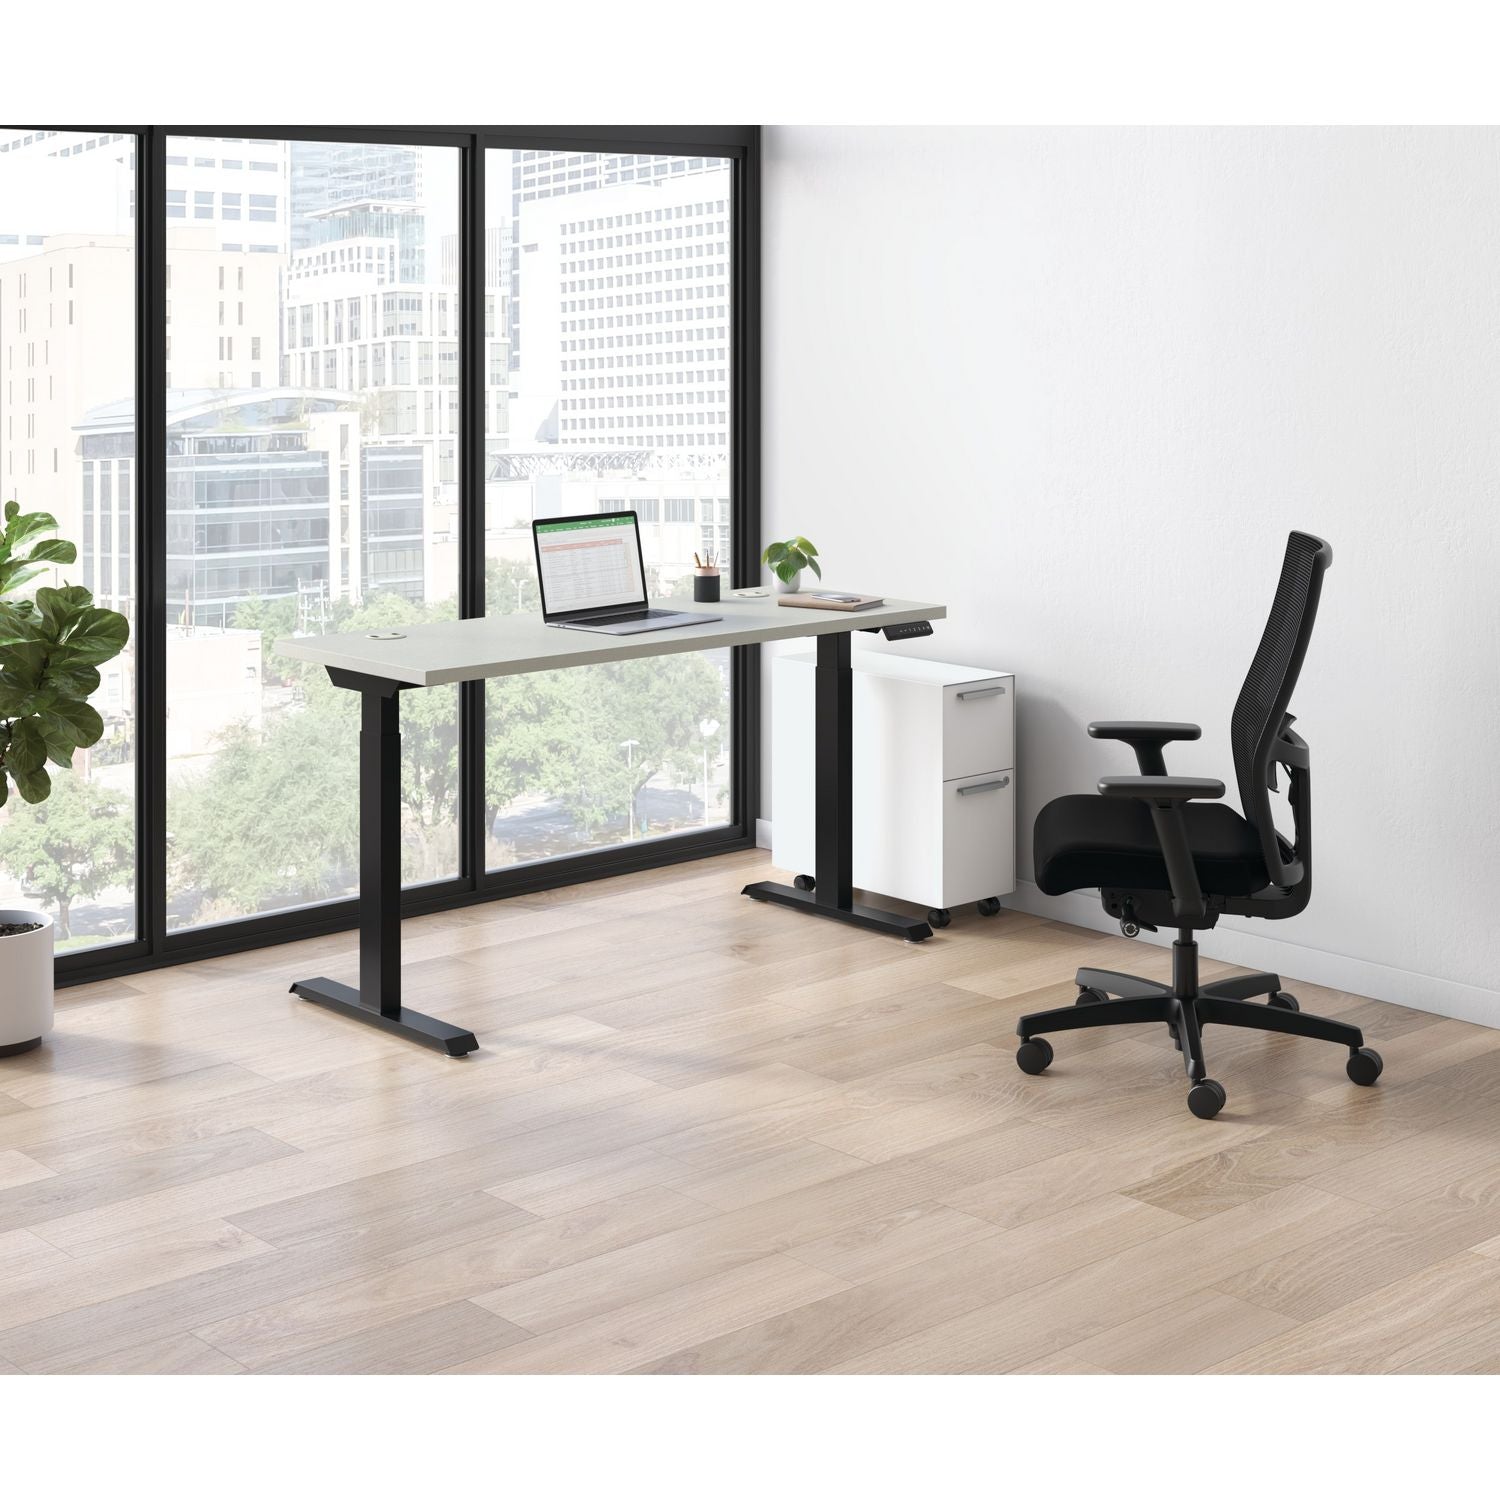 coordinate-height-adjustable-desk-bundle-2-stage-58-x-22-x-2775-to-47-silver-mesh\\black-ships-in-7-10-business-days_honhat2smbk2258 - 6